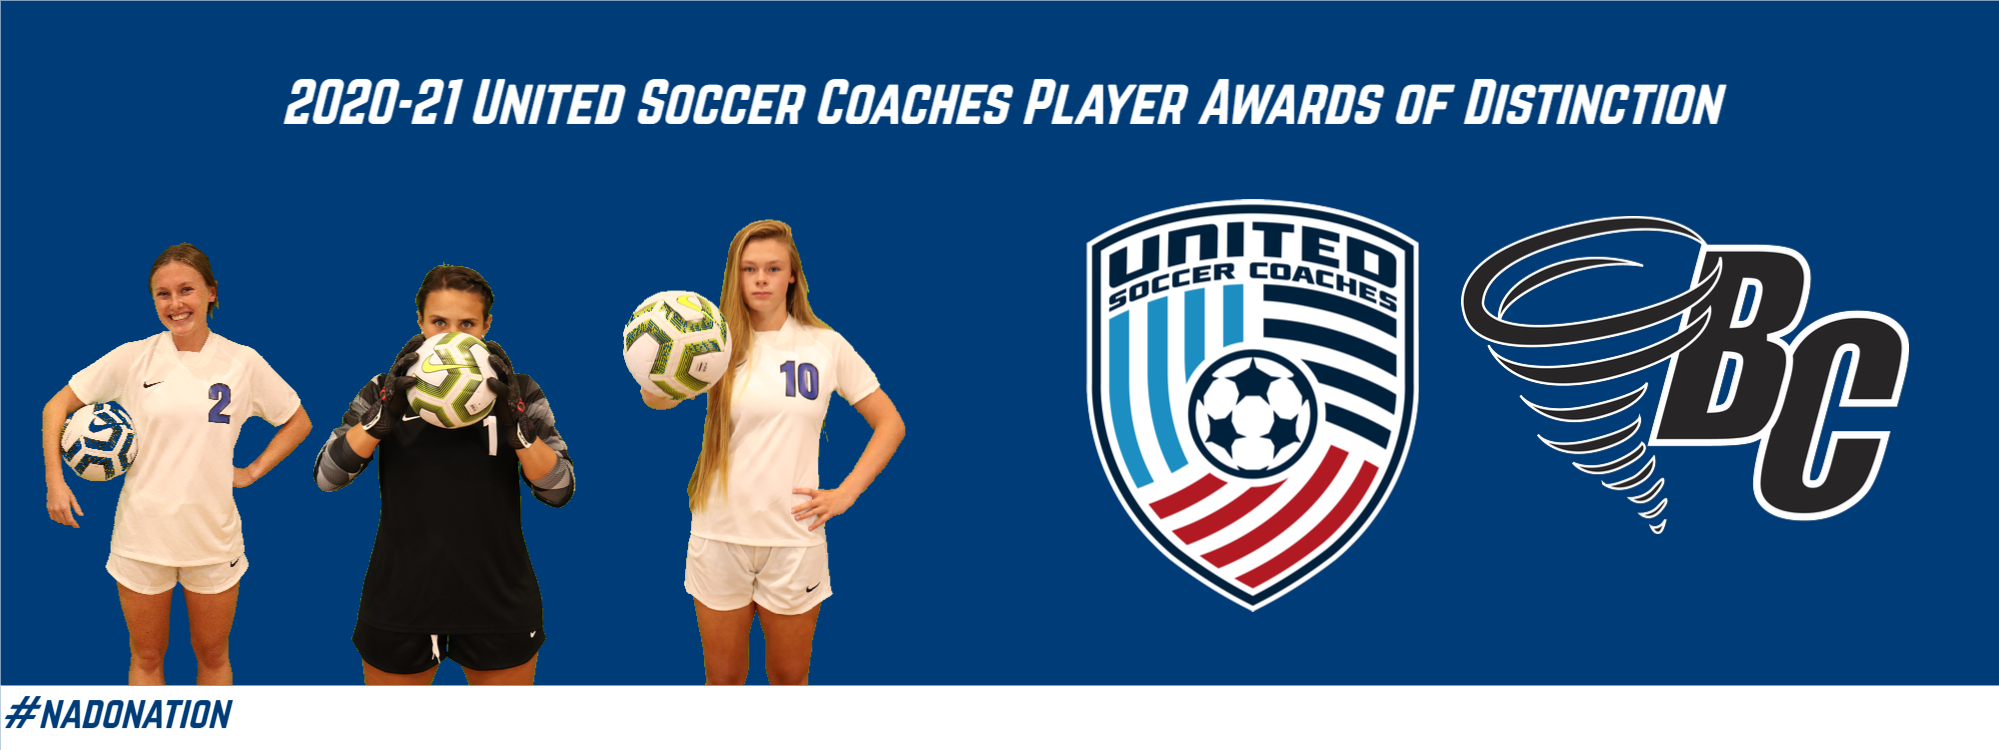 Riggan, Rojas and Worsencroft Earn Awards of Distinction from United Soccer Coaches